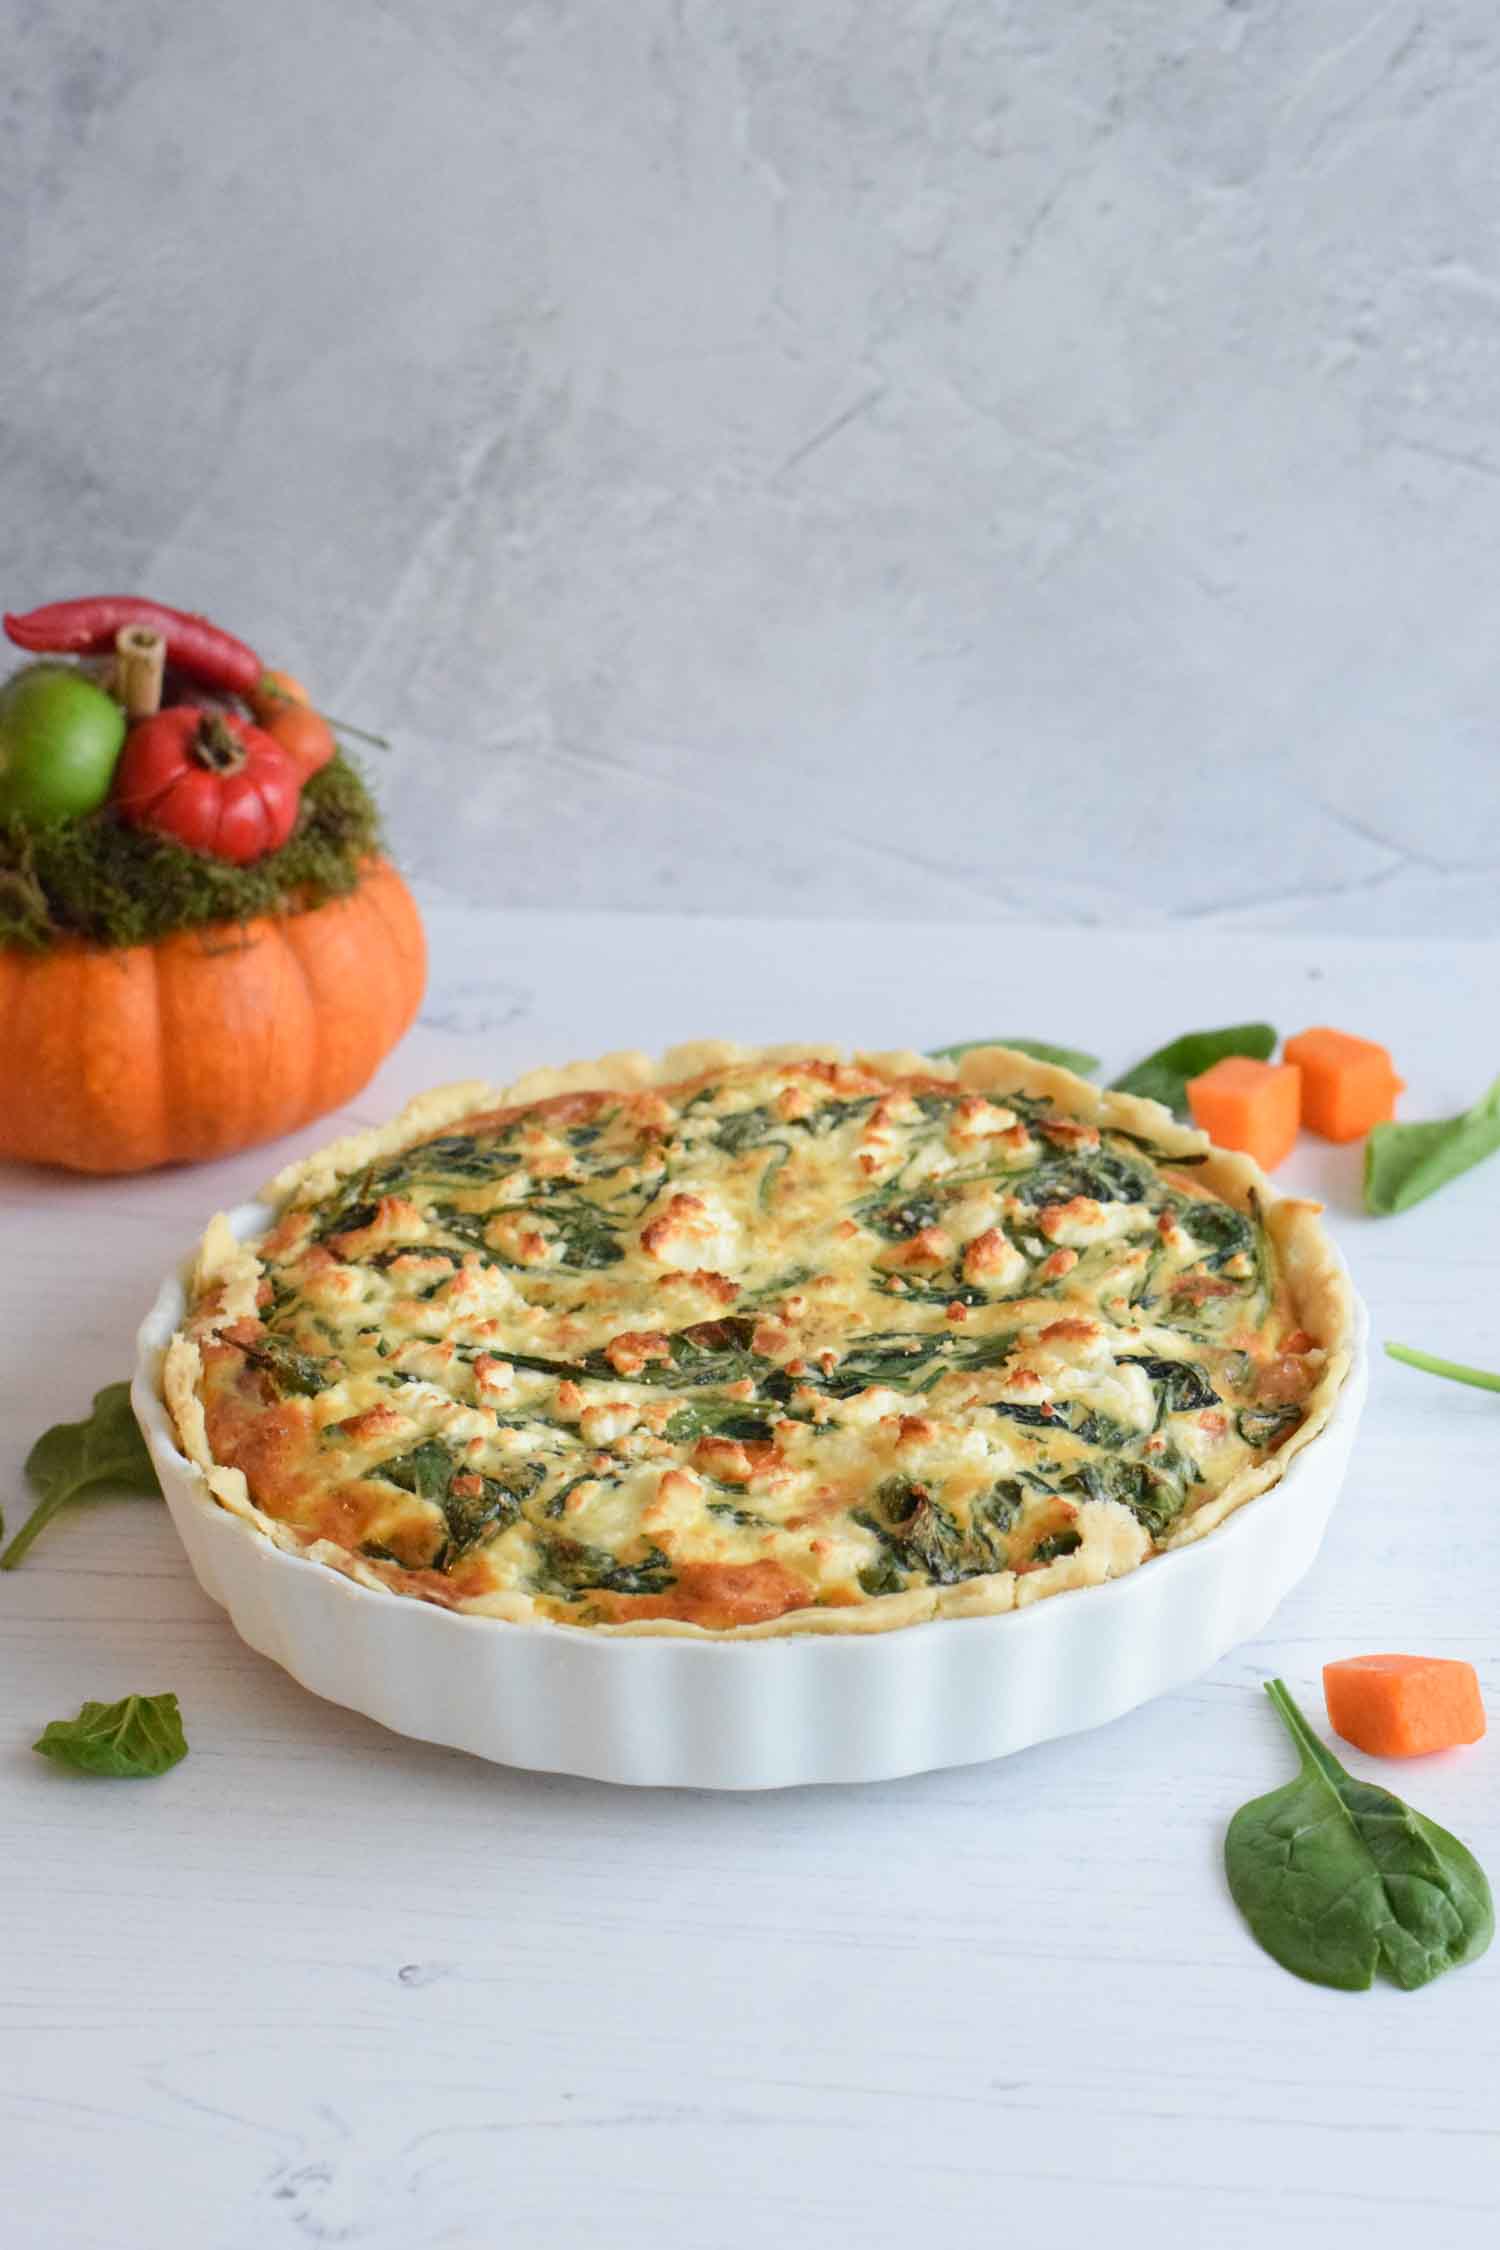 A low FODMAP pumpkin quiche with spinach and feta